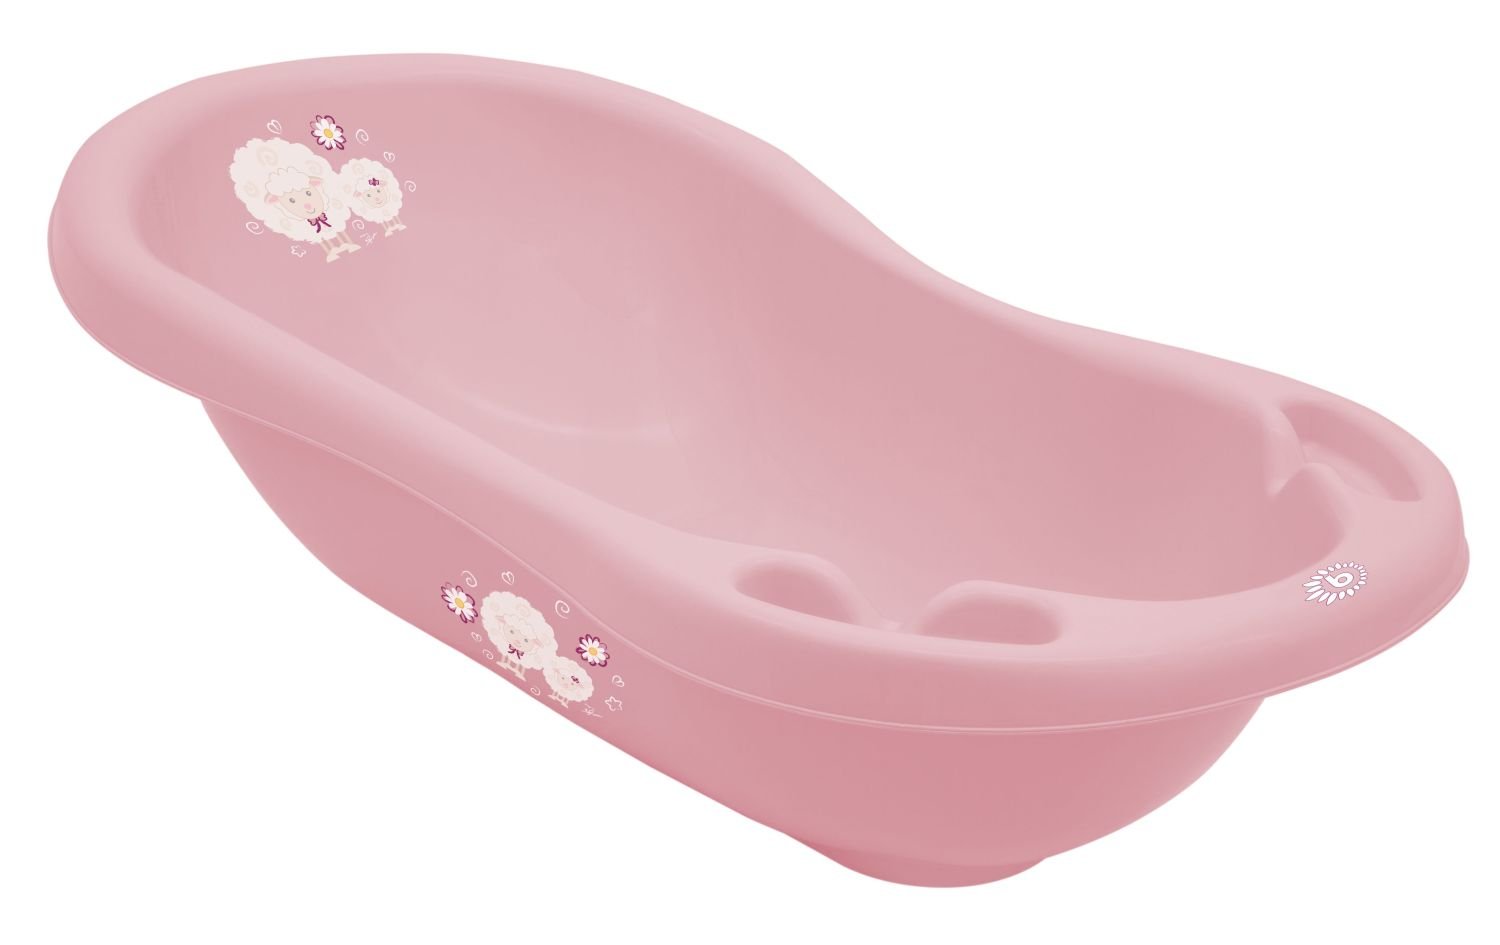 Bieco Ergonomic baby bath sheep in pink, from 0 to 12 months, 84 cm, non-toxic bath with plug for newborns, very durable, made in Europe, 11181707